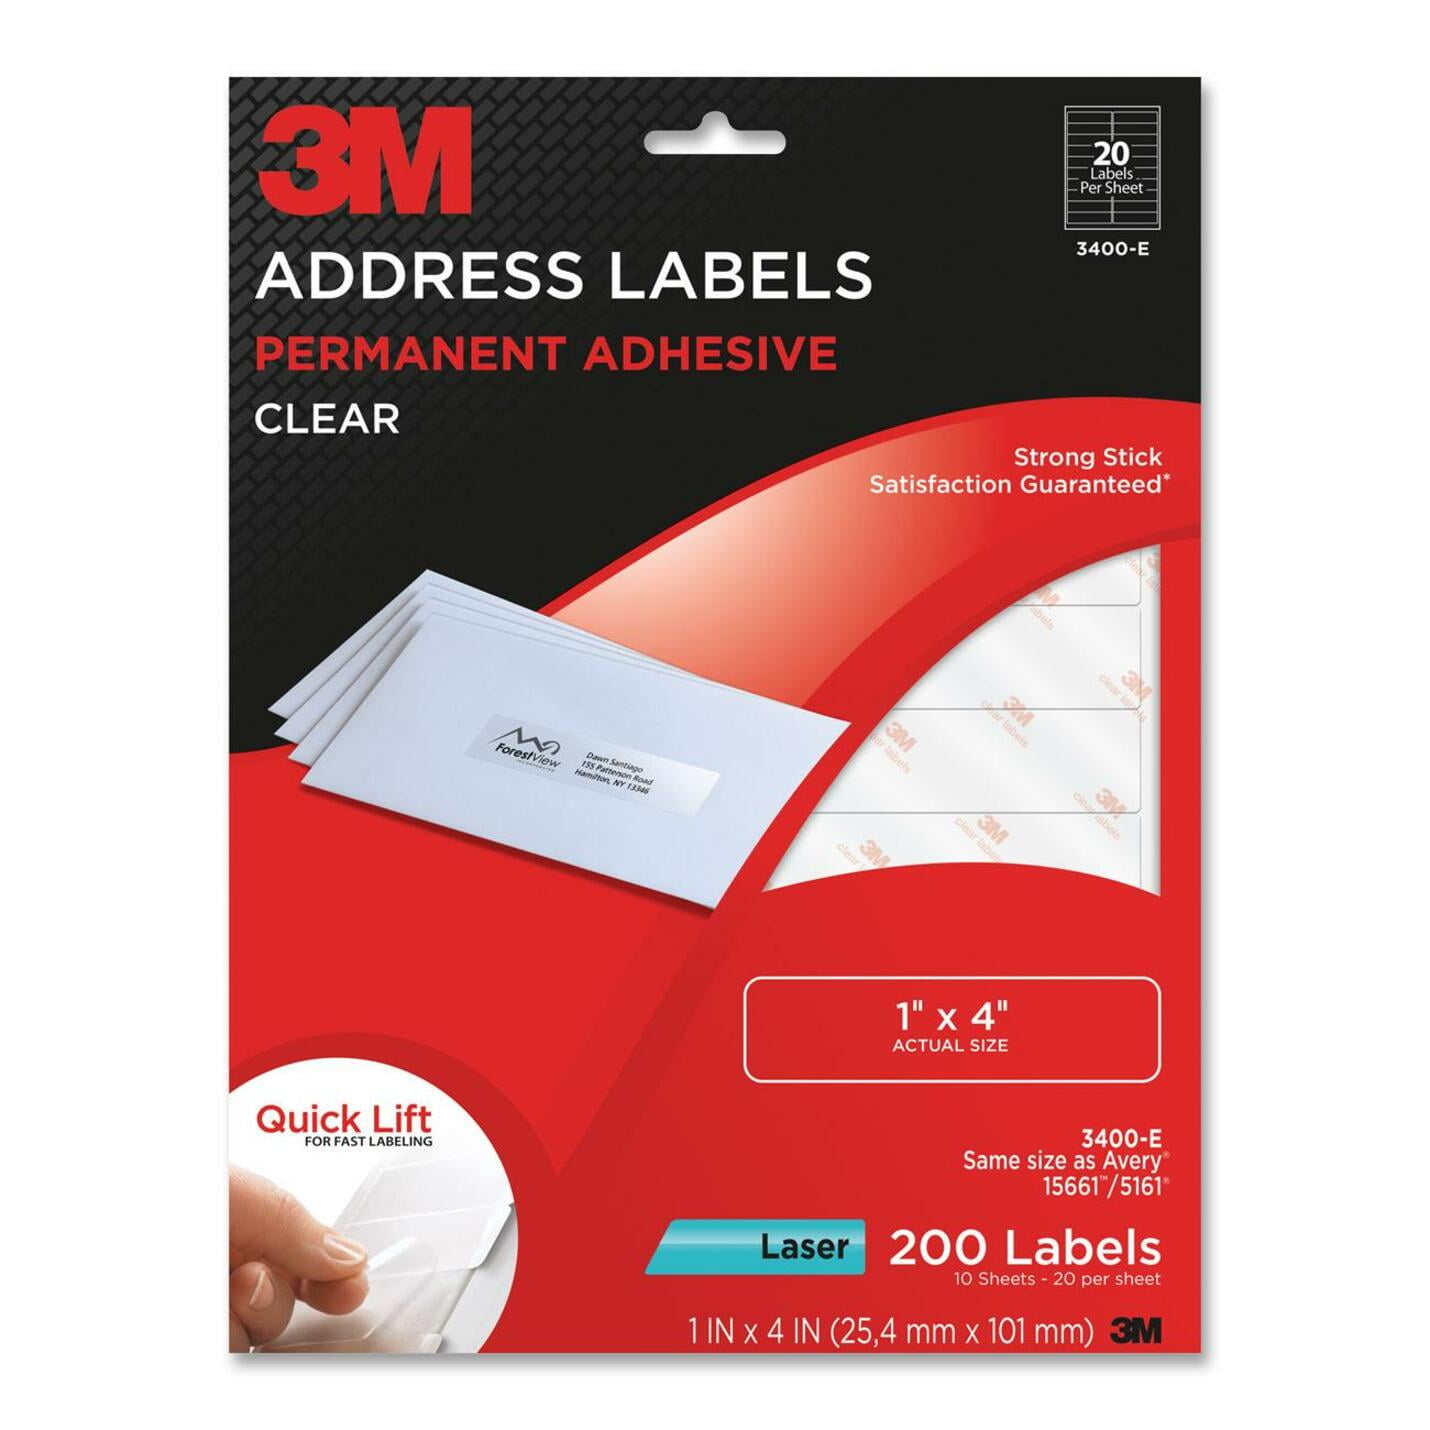 23M Address Label Within 3M Label Template